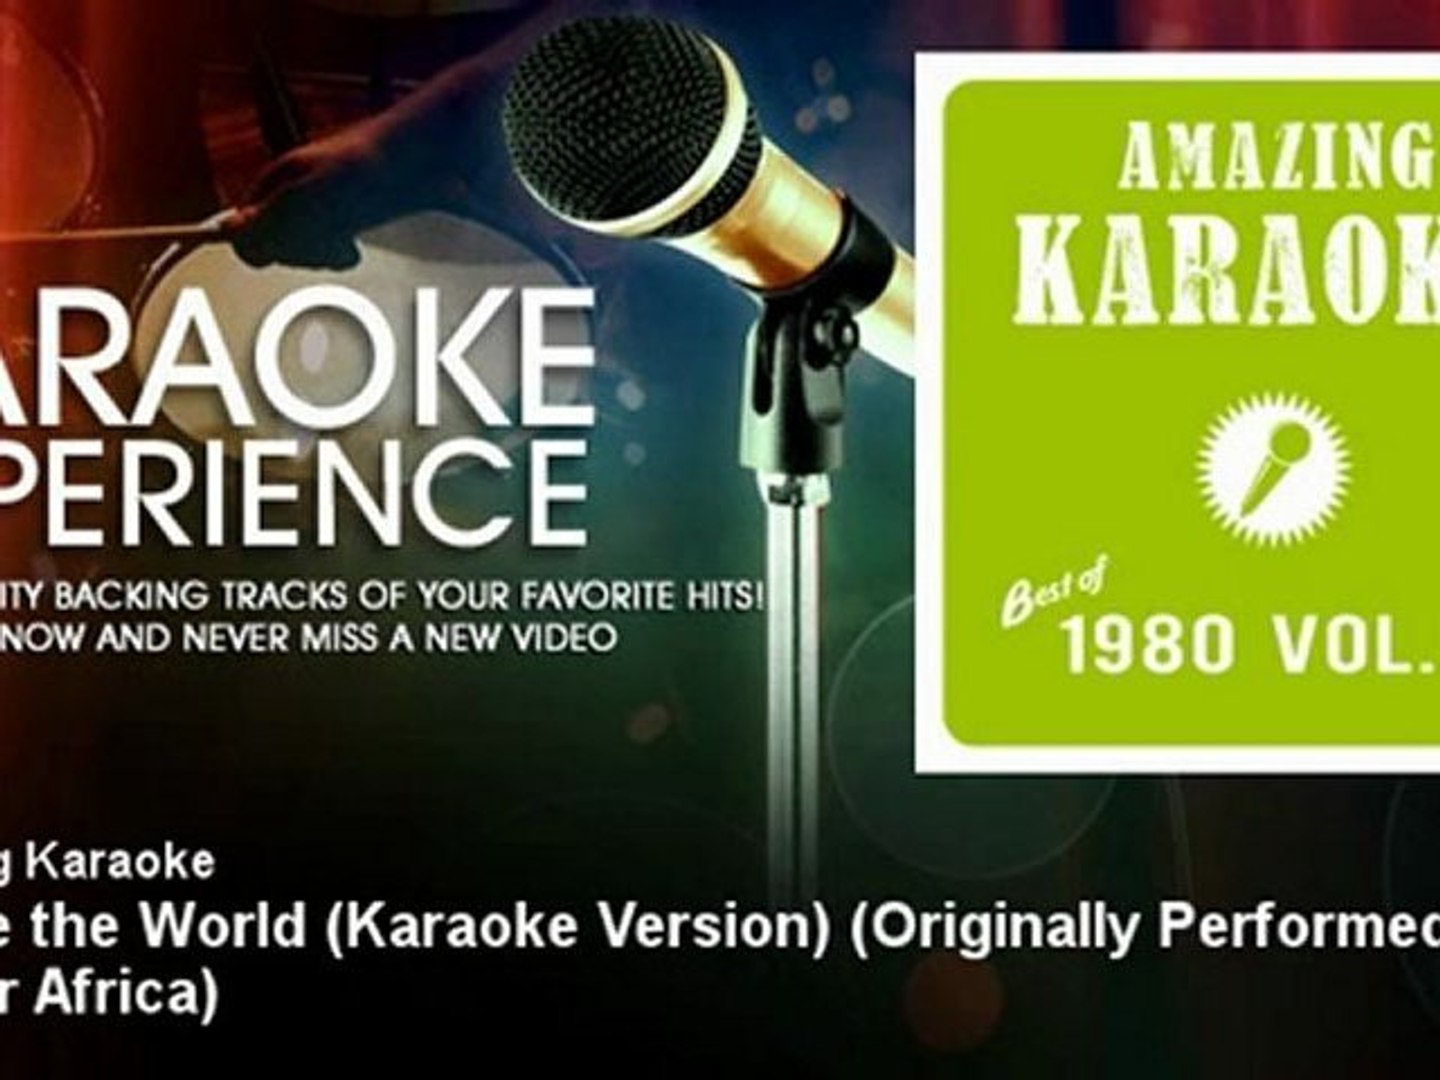 Amazing Karaoke - We Are the World (Karaoke Version) - Originally Performed  By Usa for Africa - Vidéo Dailymotion